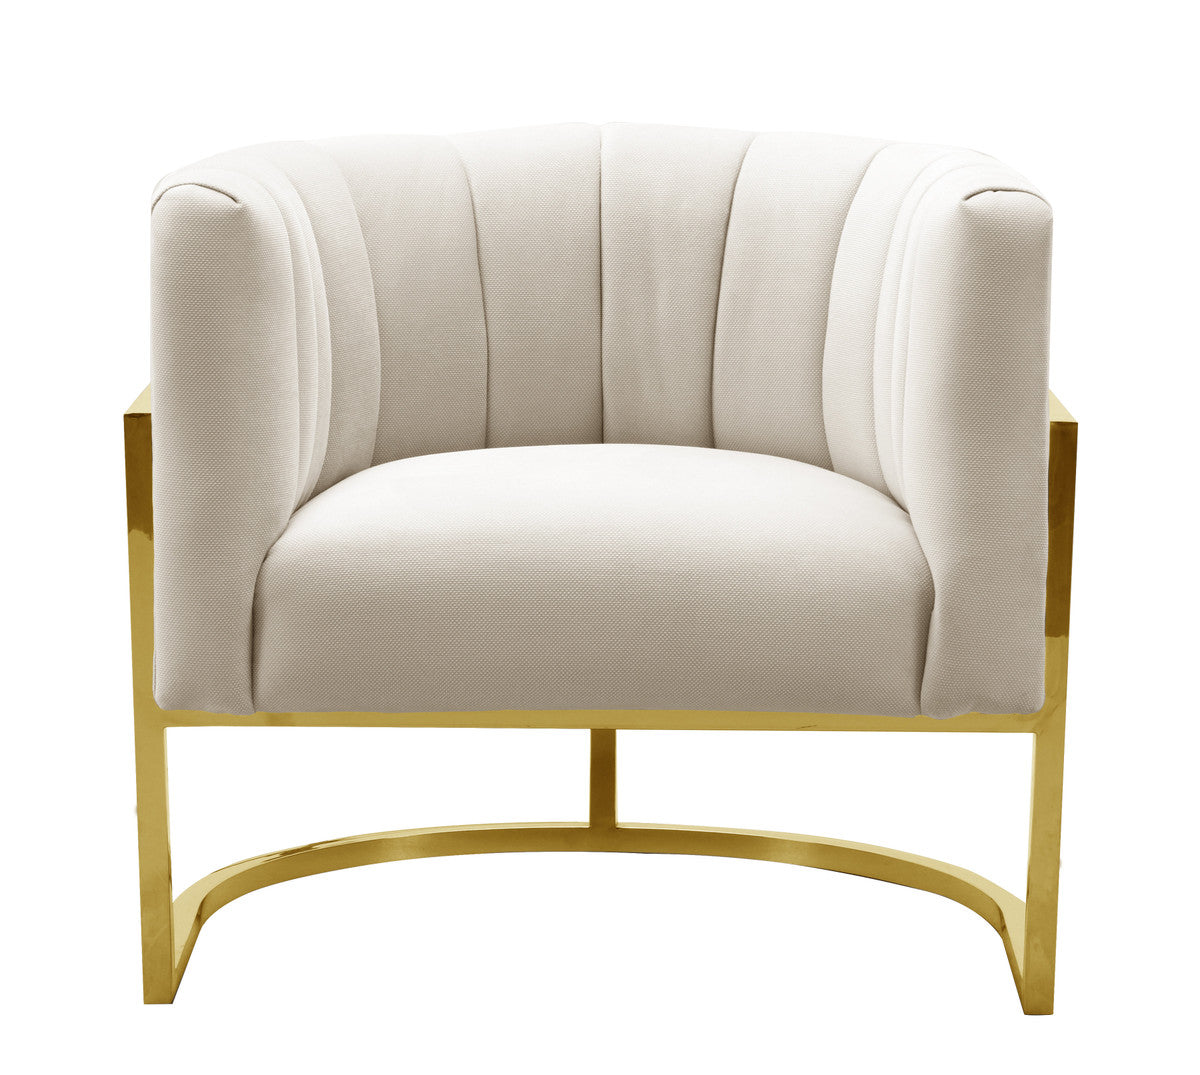 Chloe Cream Fabric Chair - Luxury Living Collection